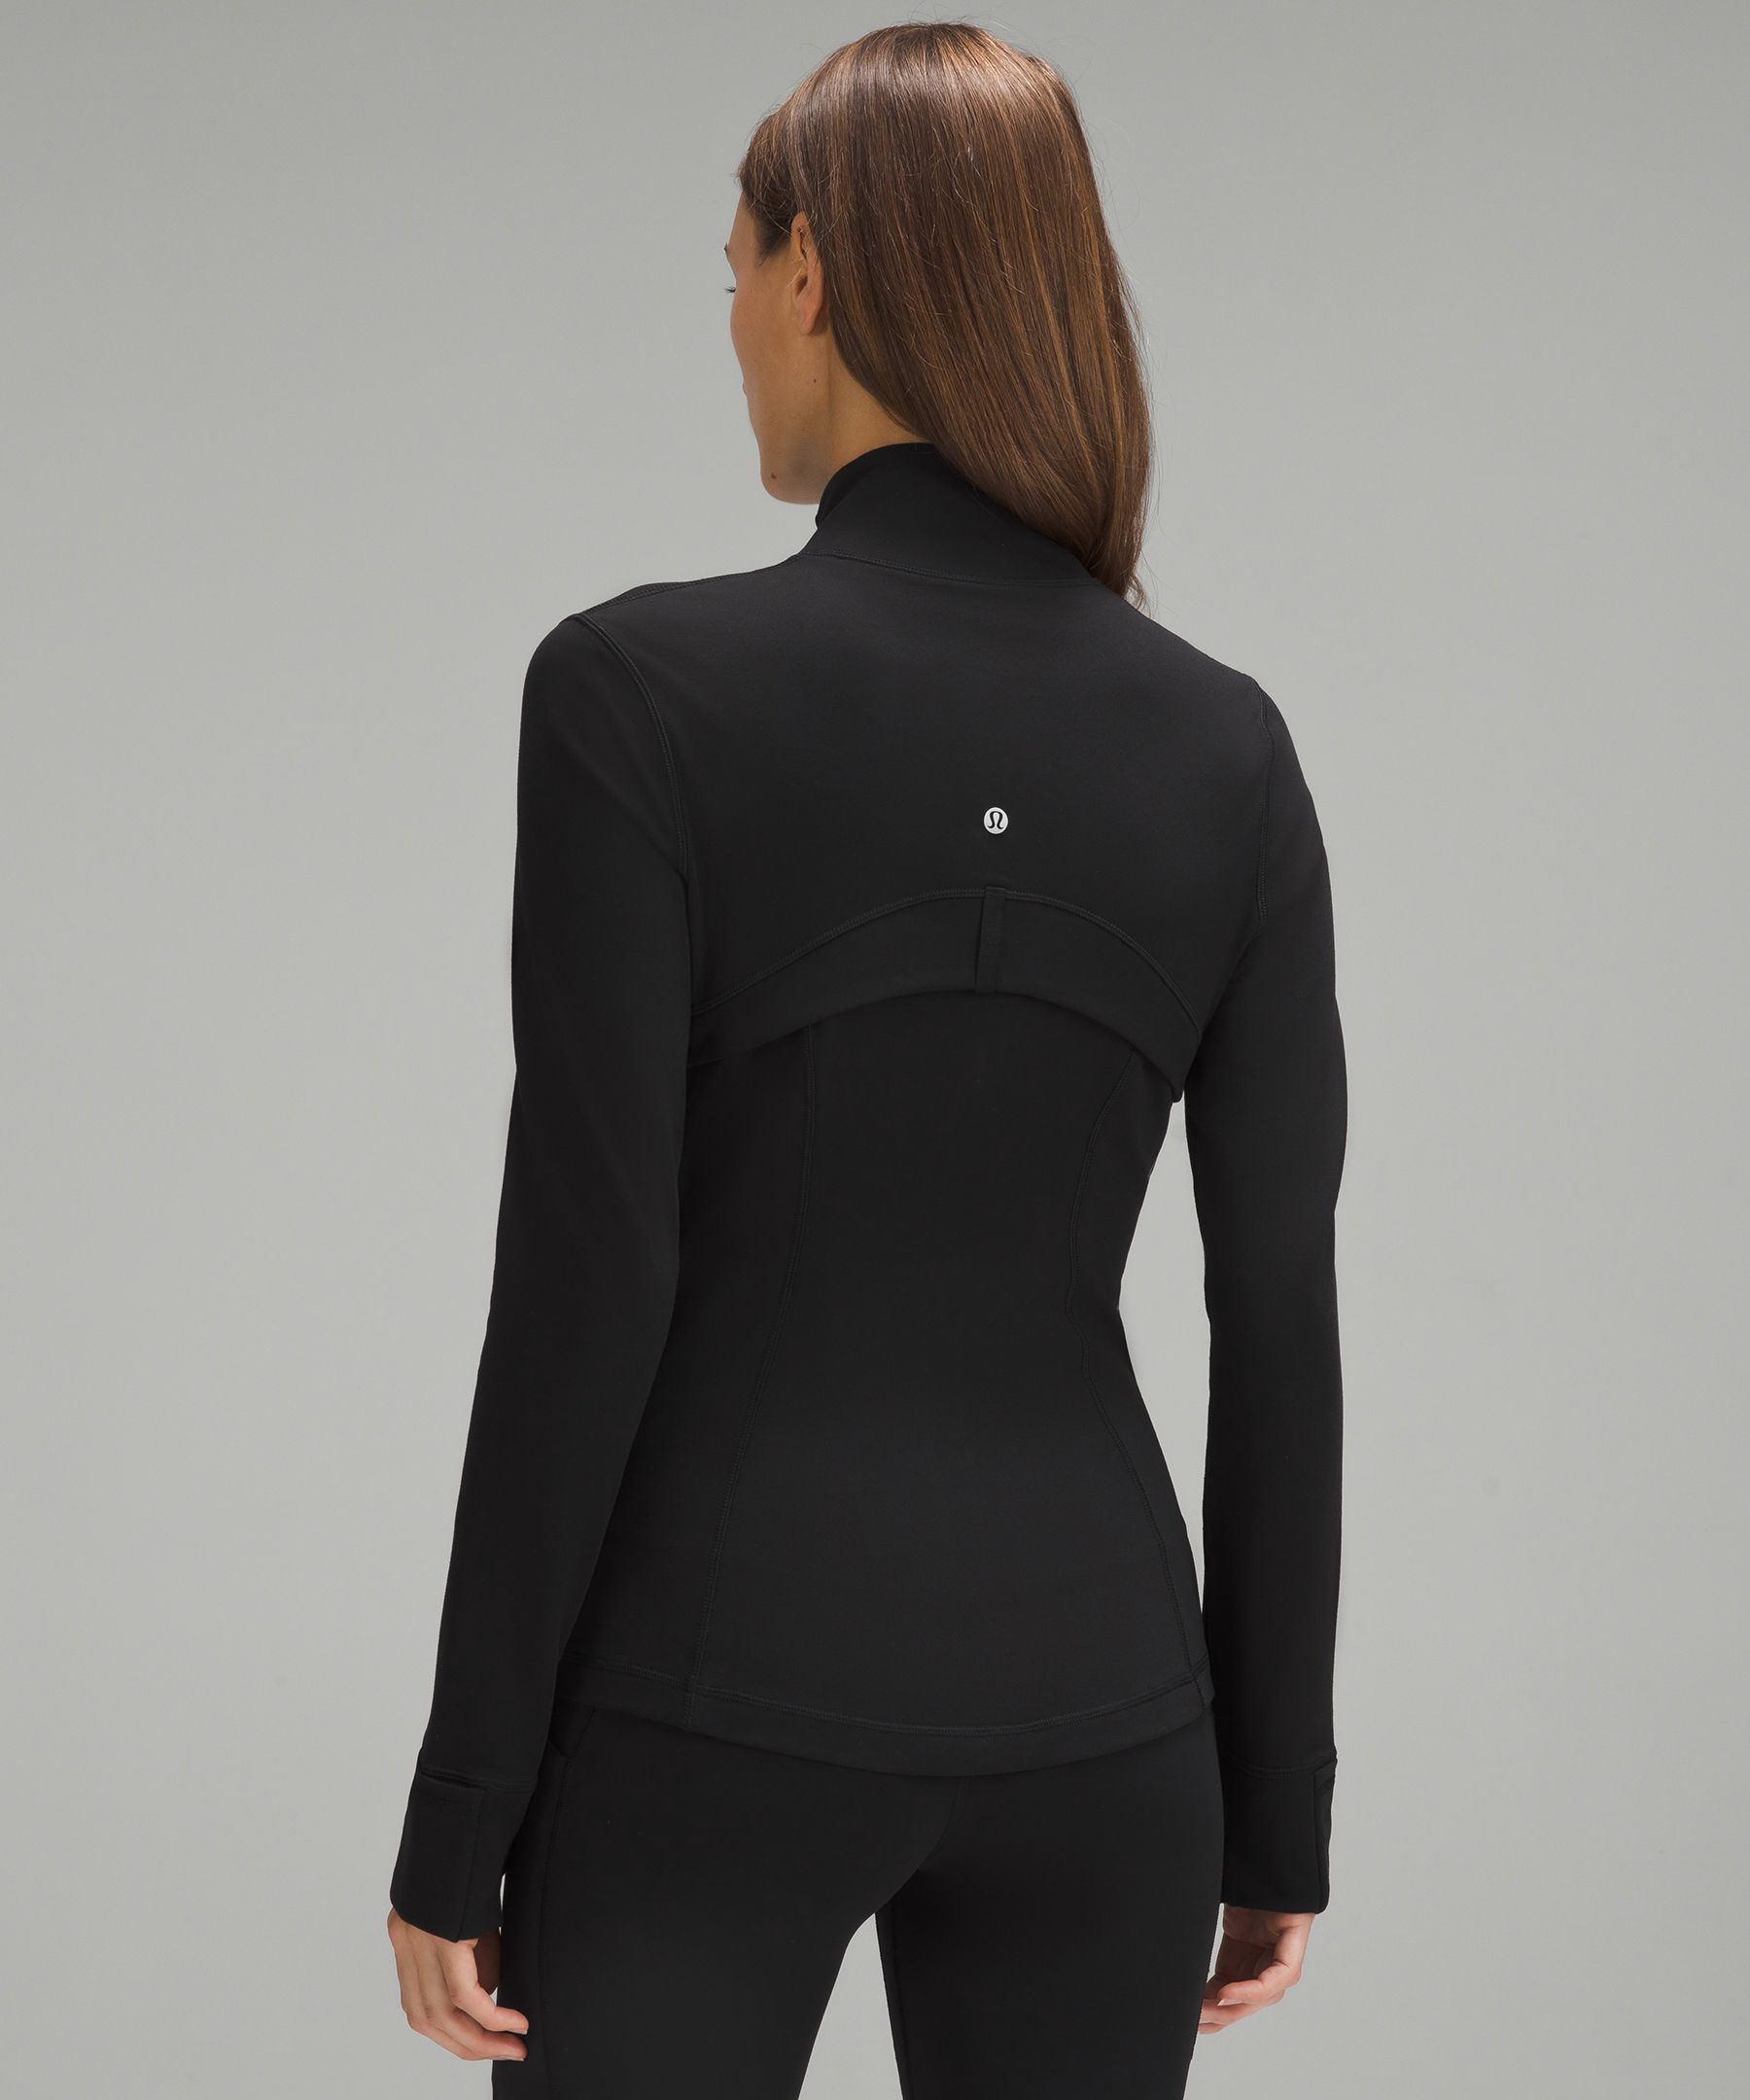 What Is the Lululemon BBL Jacket? Discover Its Unique Features - Playbite